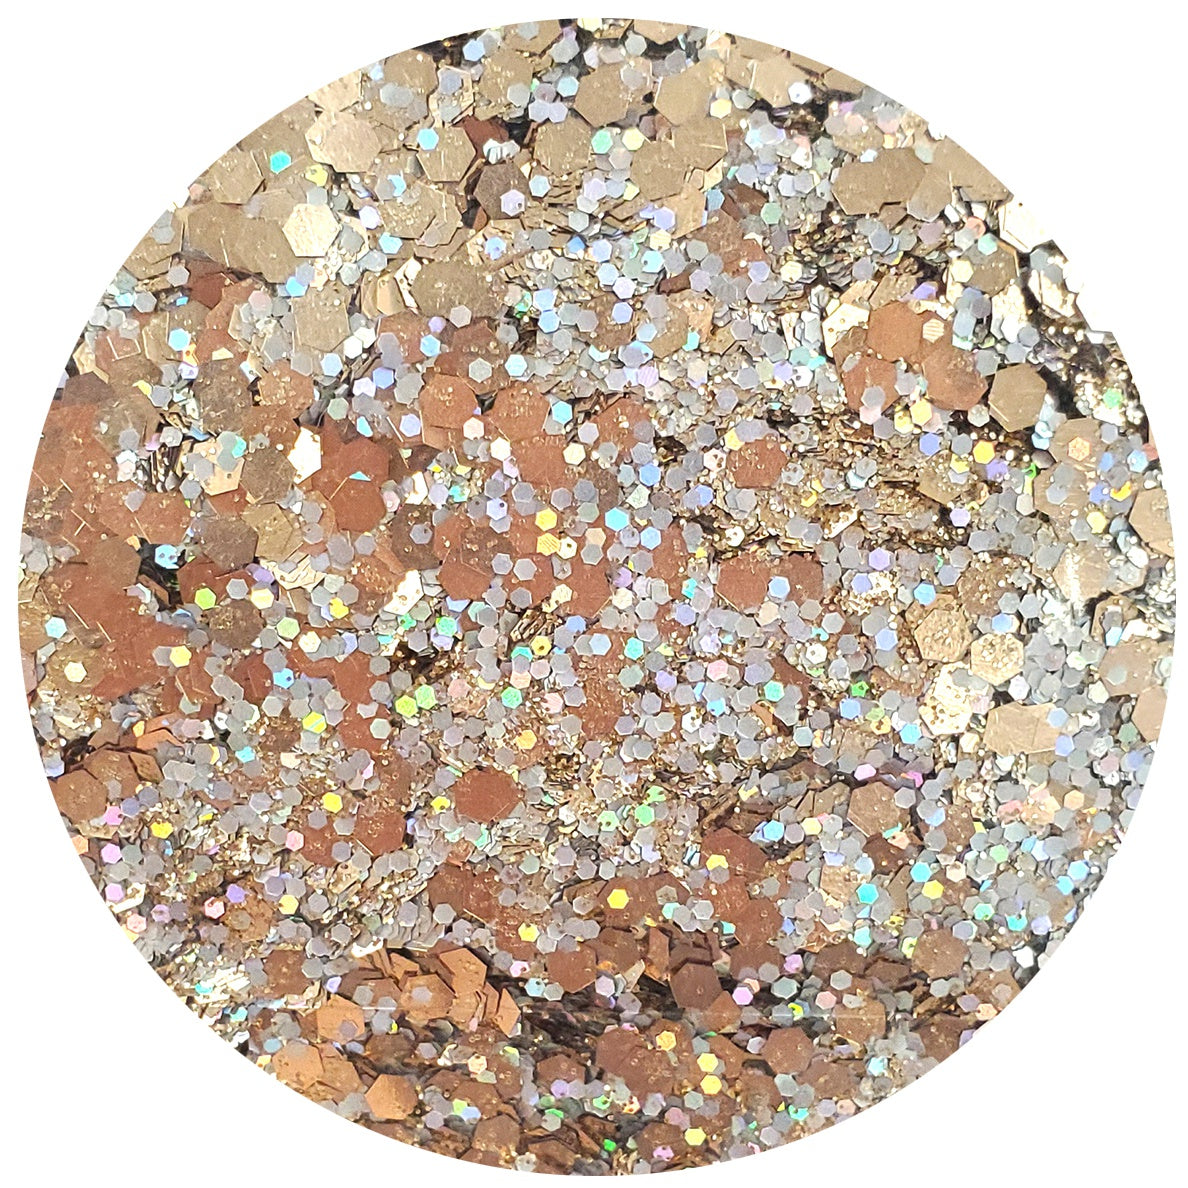 We R Memory Keepers Spin It Glitter Mix 10oz